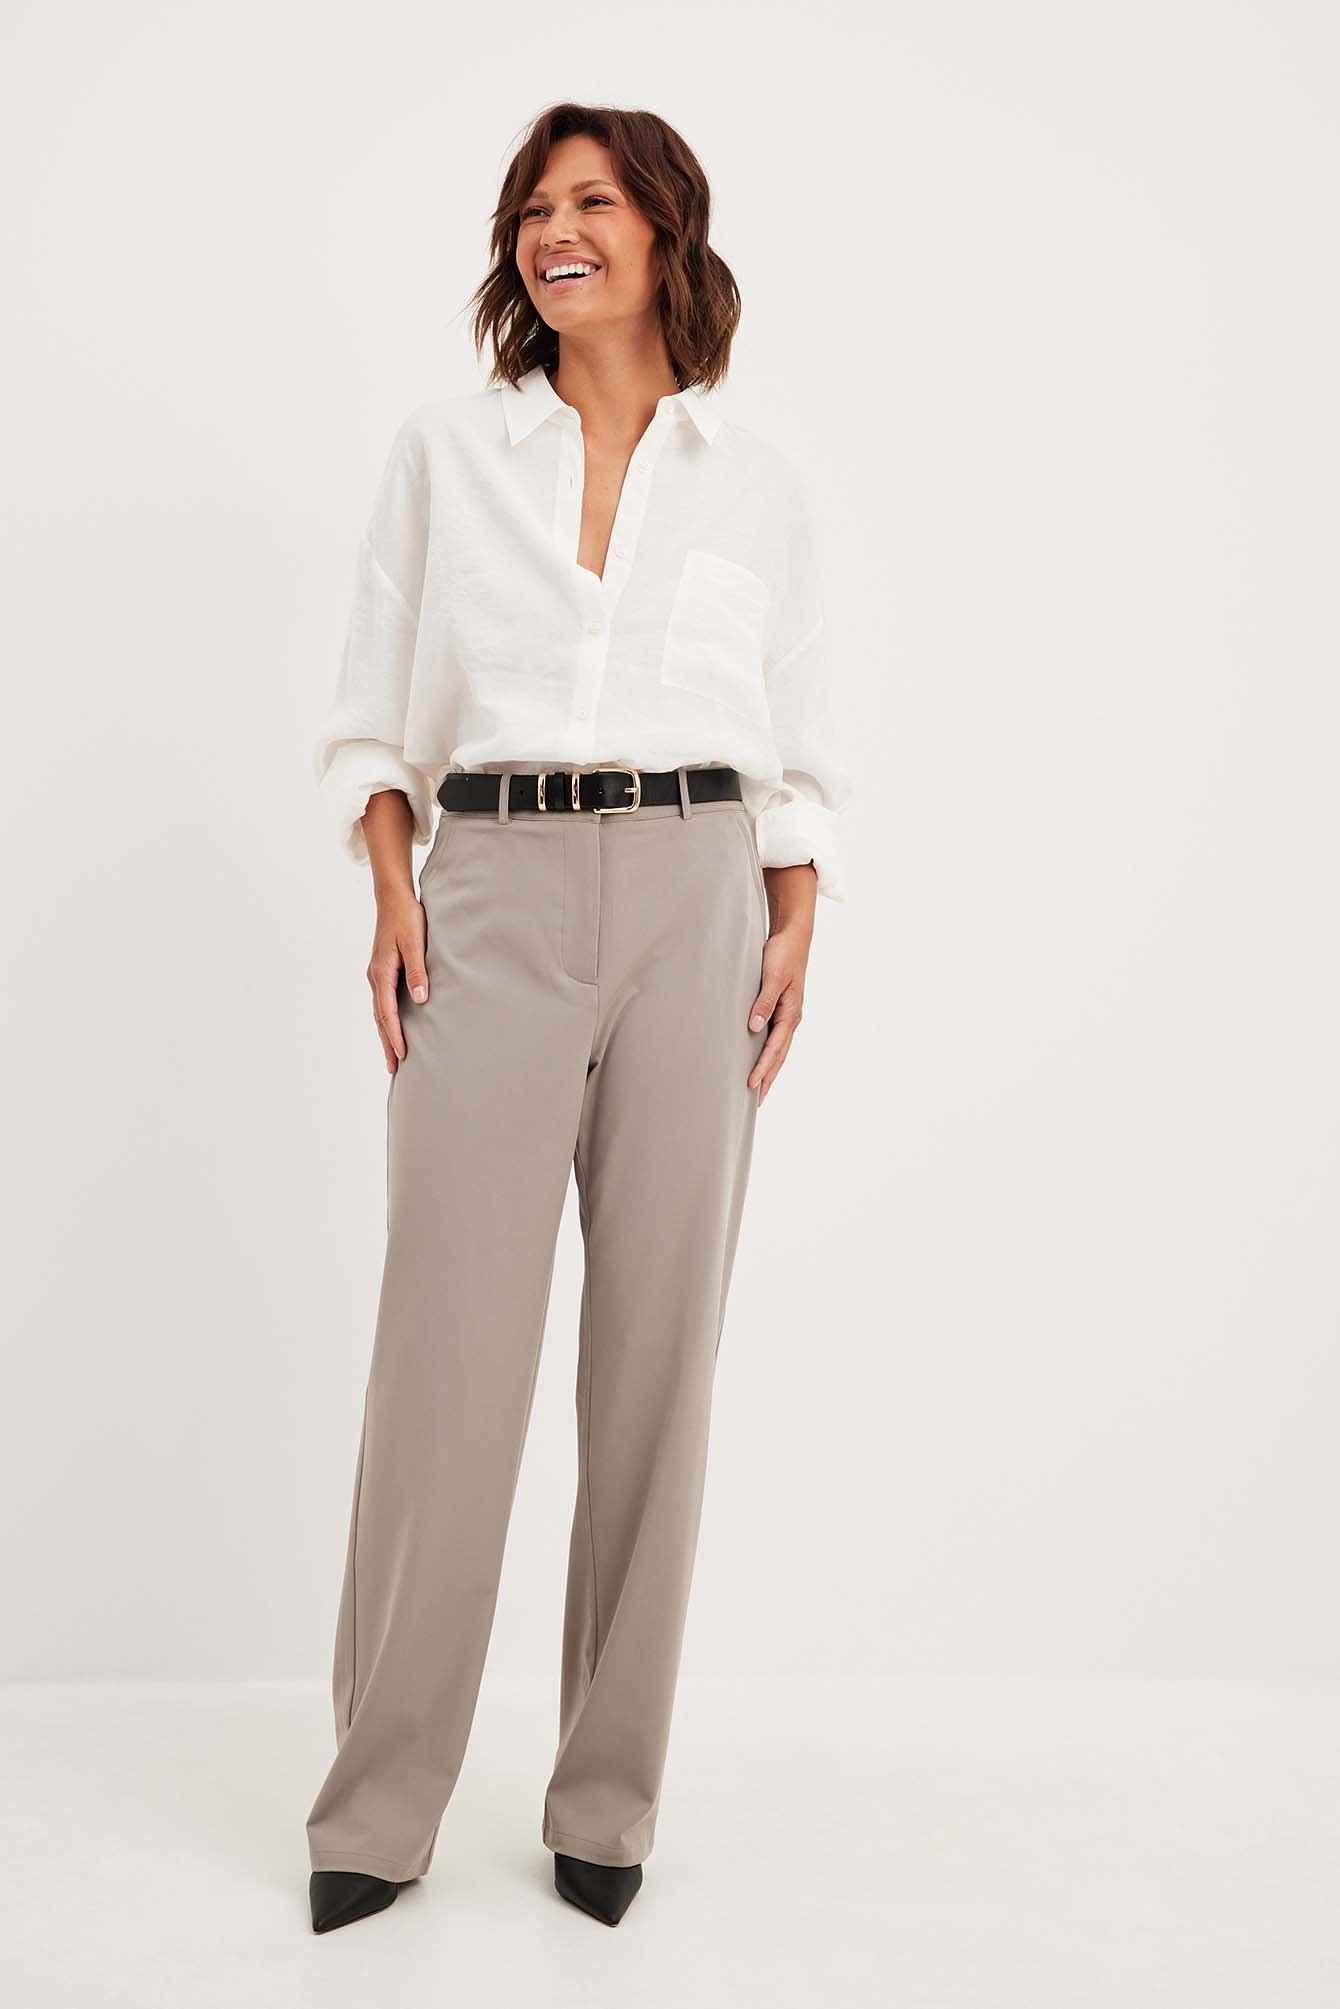 Grey Woven High Waisted Tailored Wide Leg Trousers  PrettyLittleThing